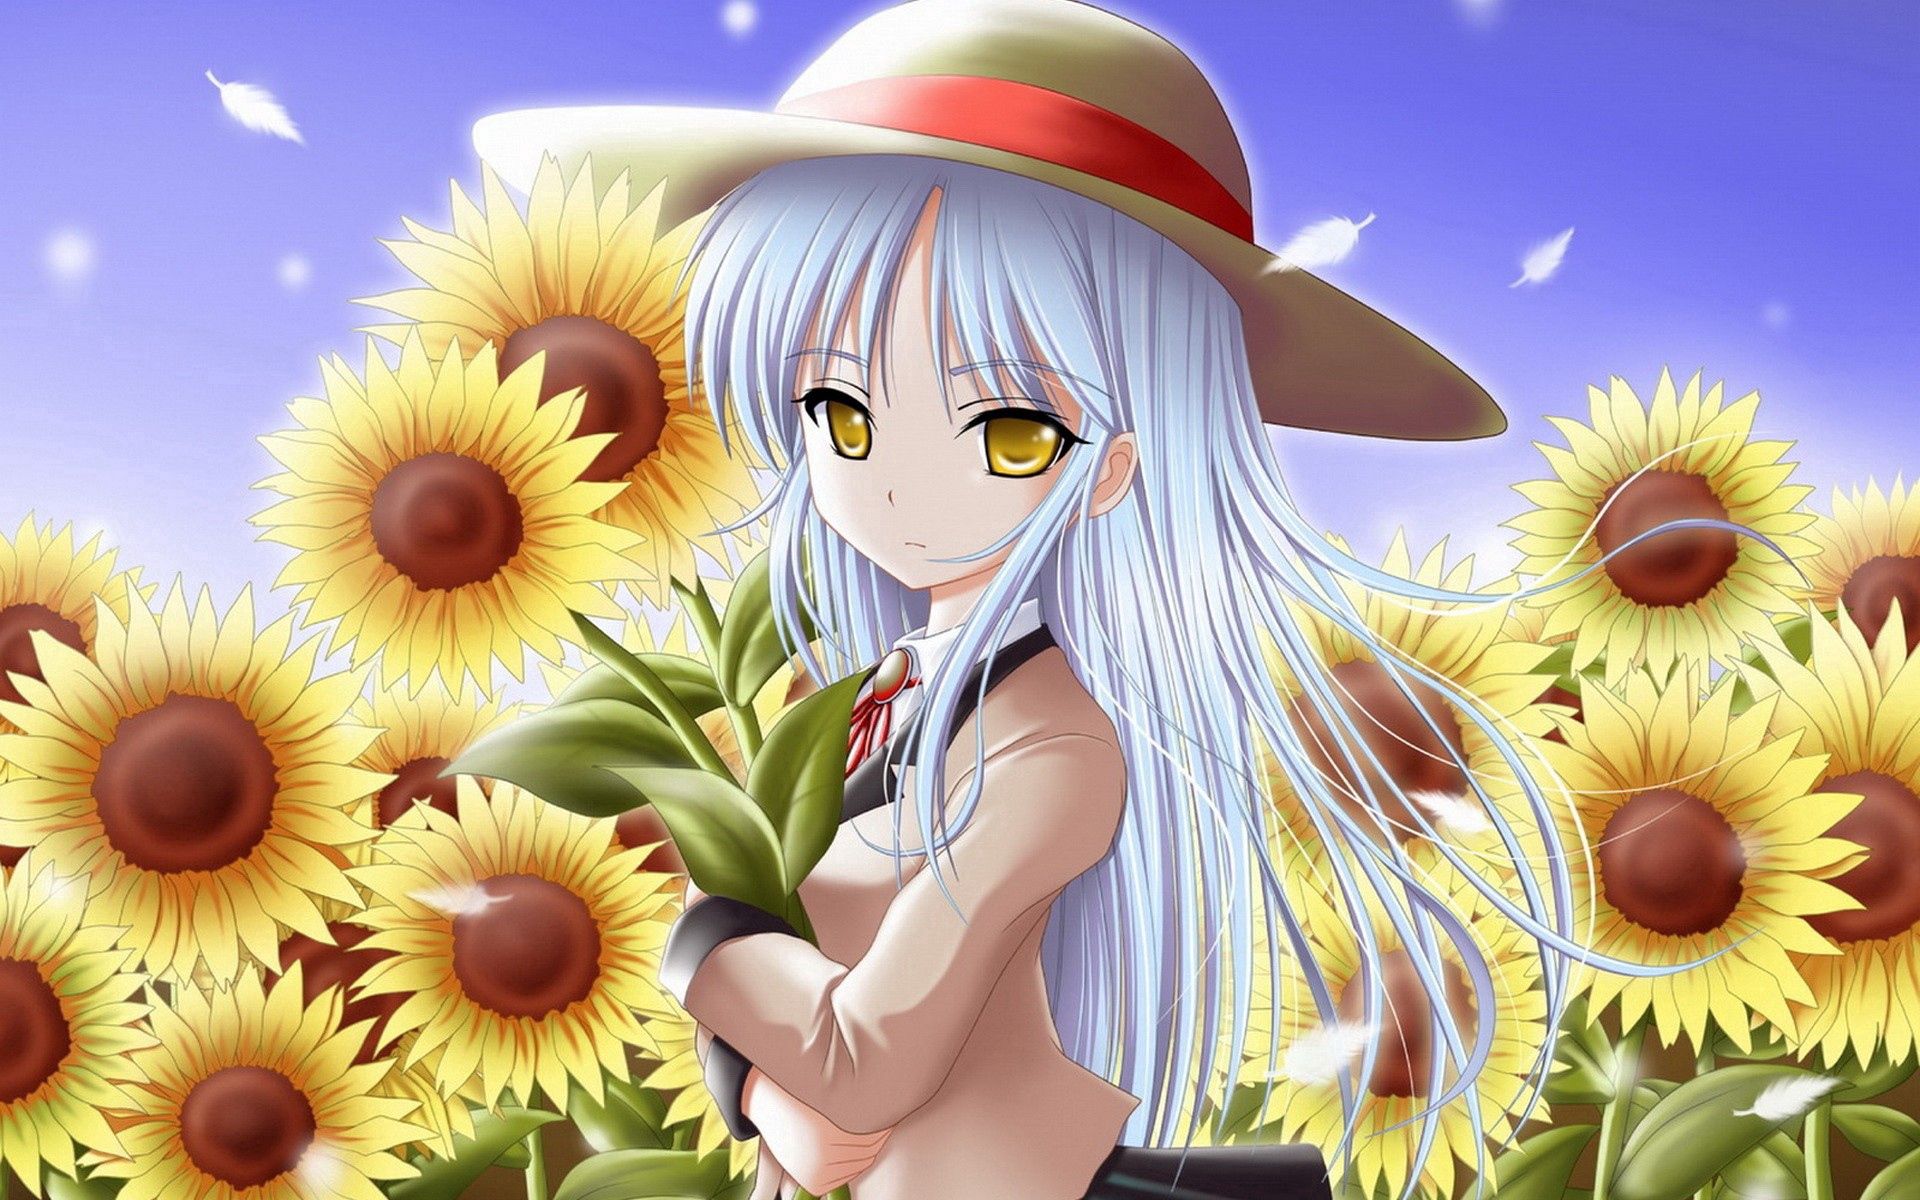 android stroll, girl, anime, sunflowers, field